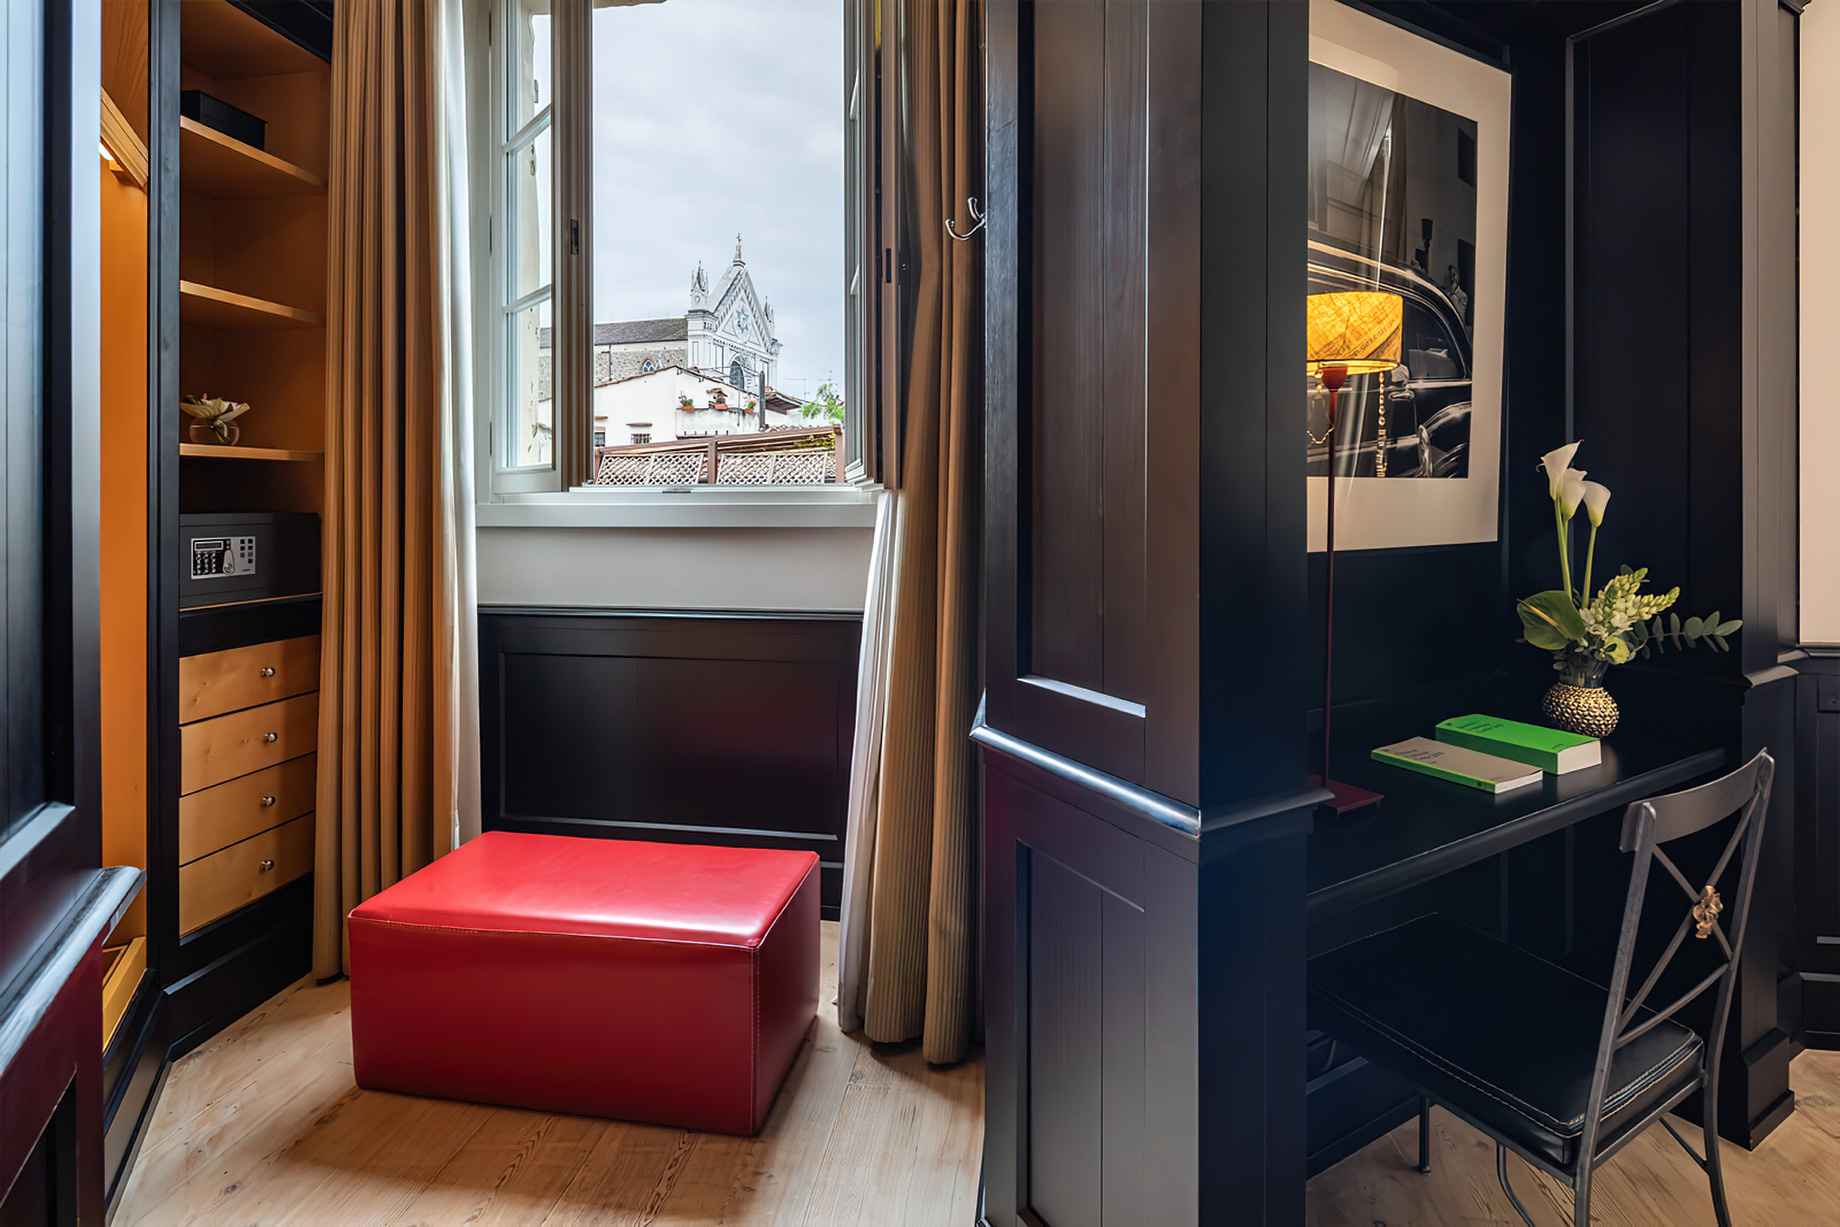 Relais Santa Croce By Baglioni Hotels & Resorts – Florence, Italy – Junior Suite Decor